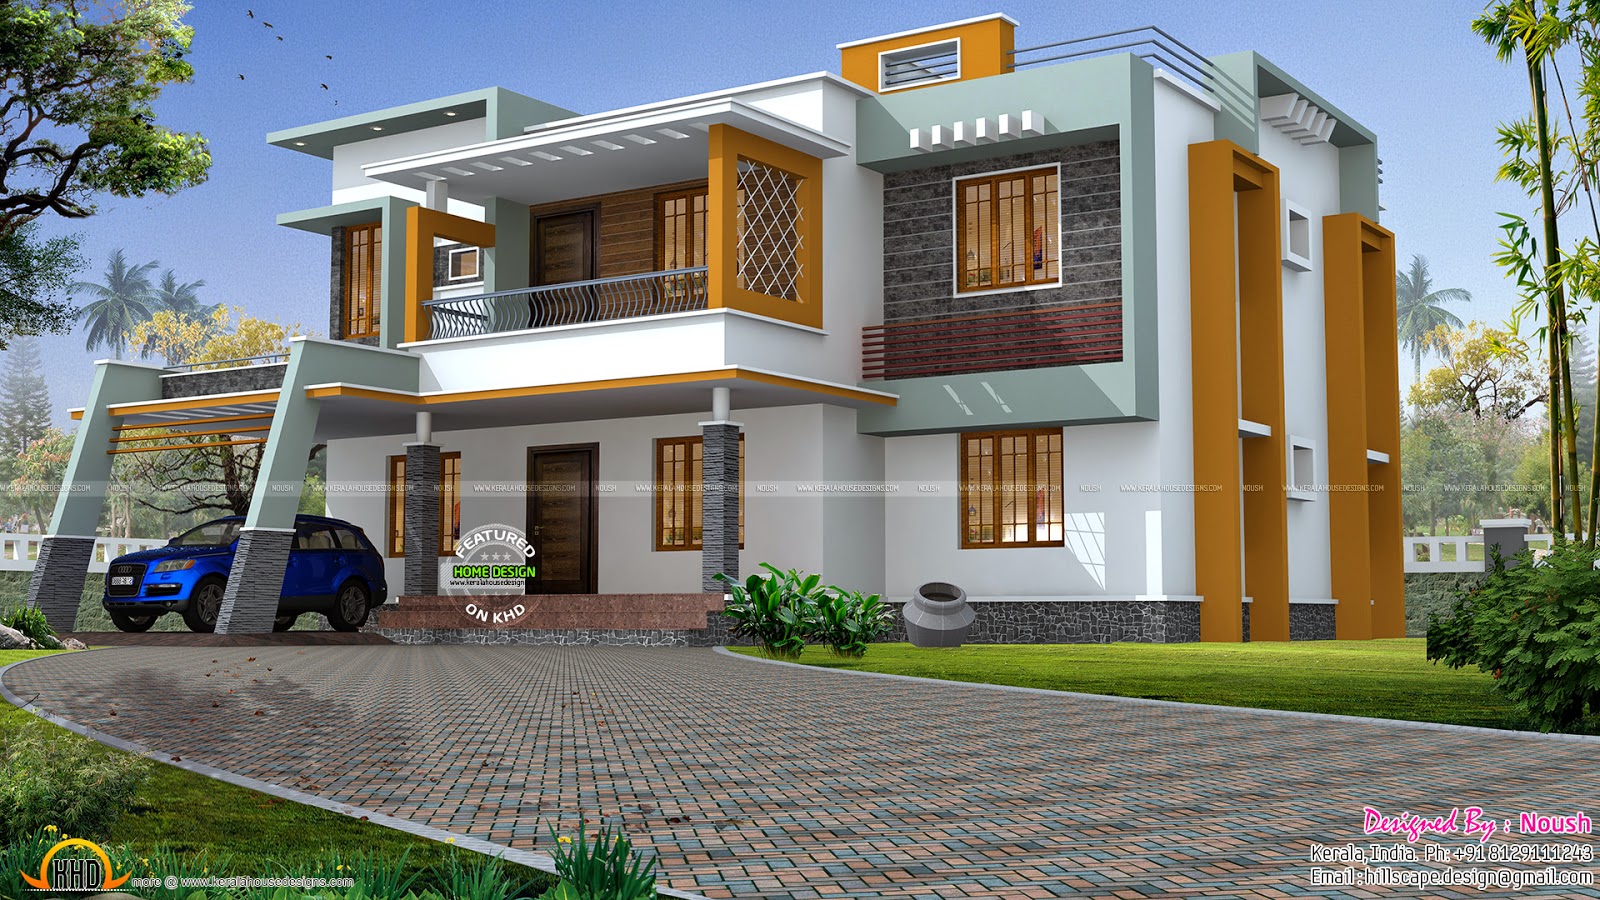  Box  style  house  Kerala home  design and floor plans 